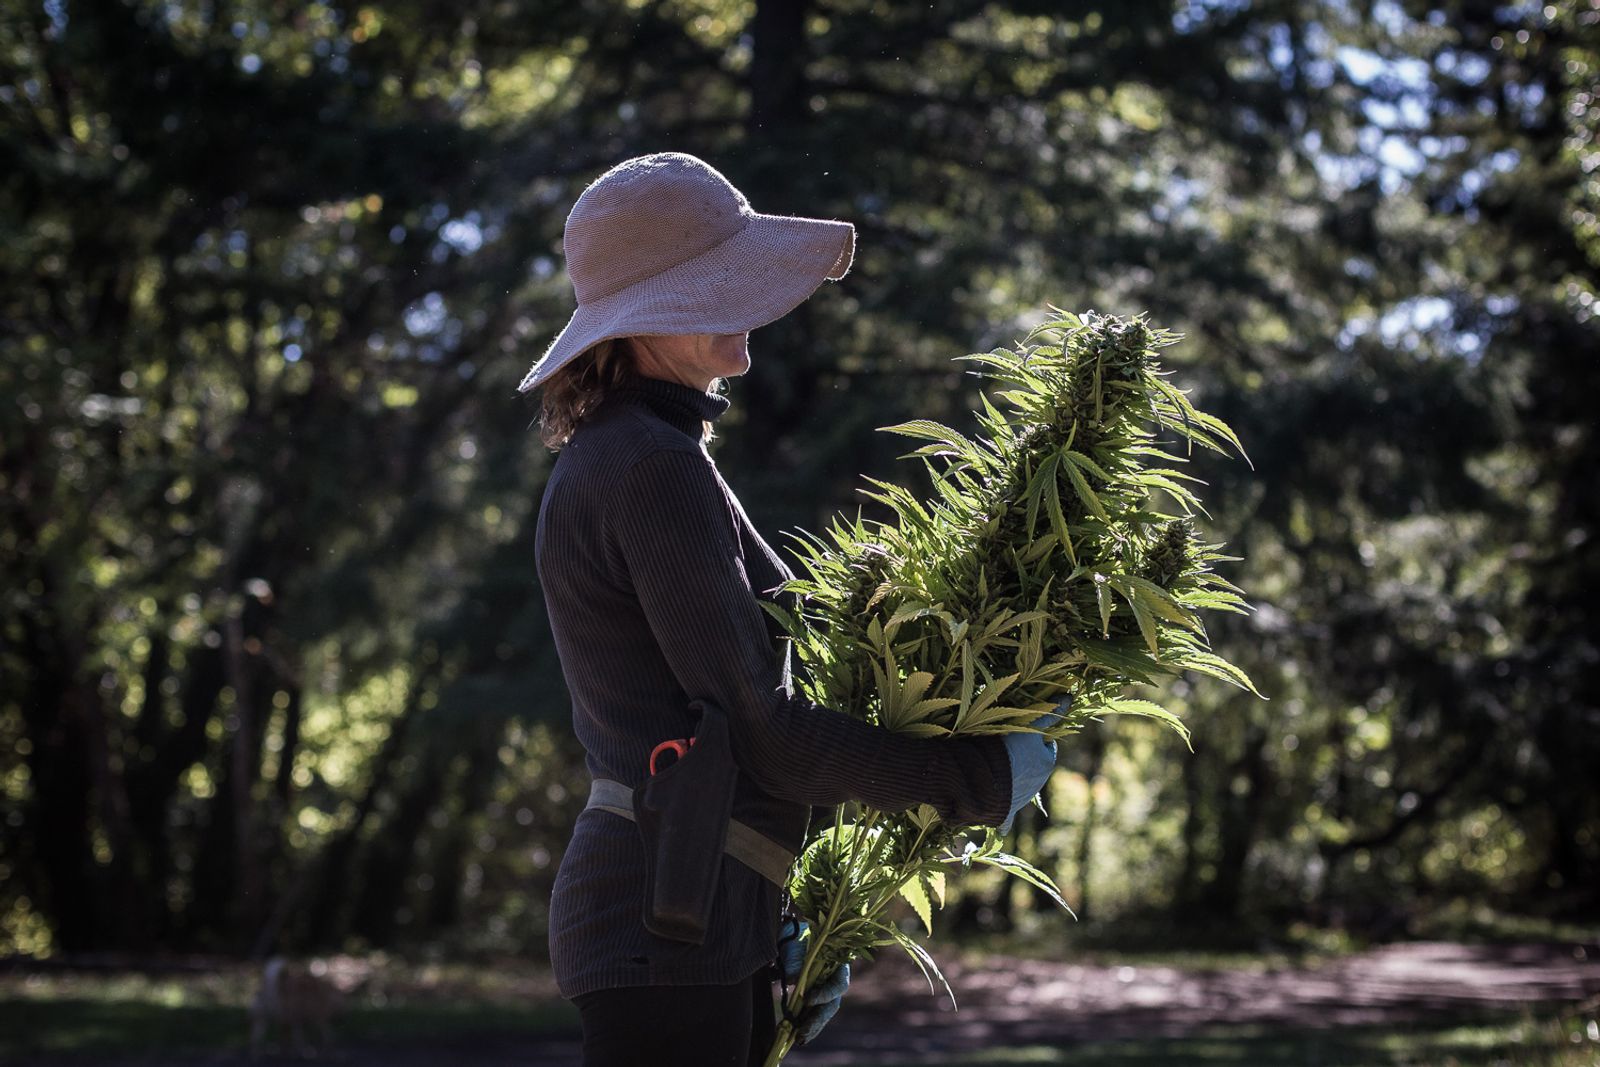 © Steef Fleur - Humboldt County California. After six months of hard work and taking care, a farmer is proud of her crop.